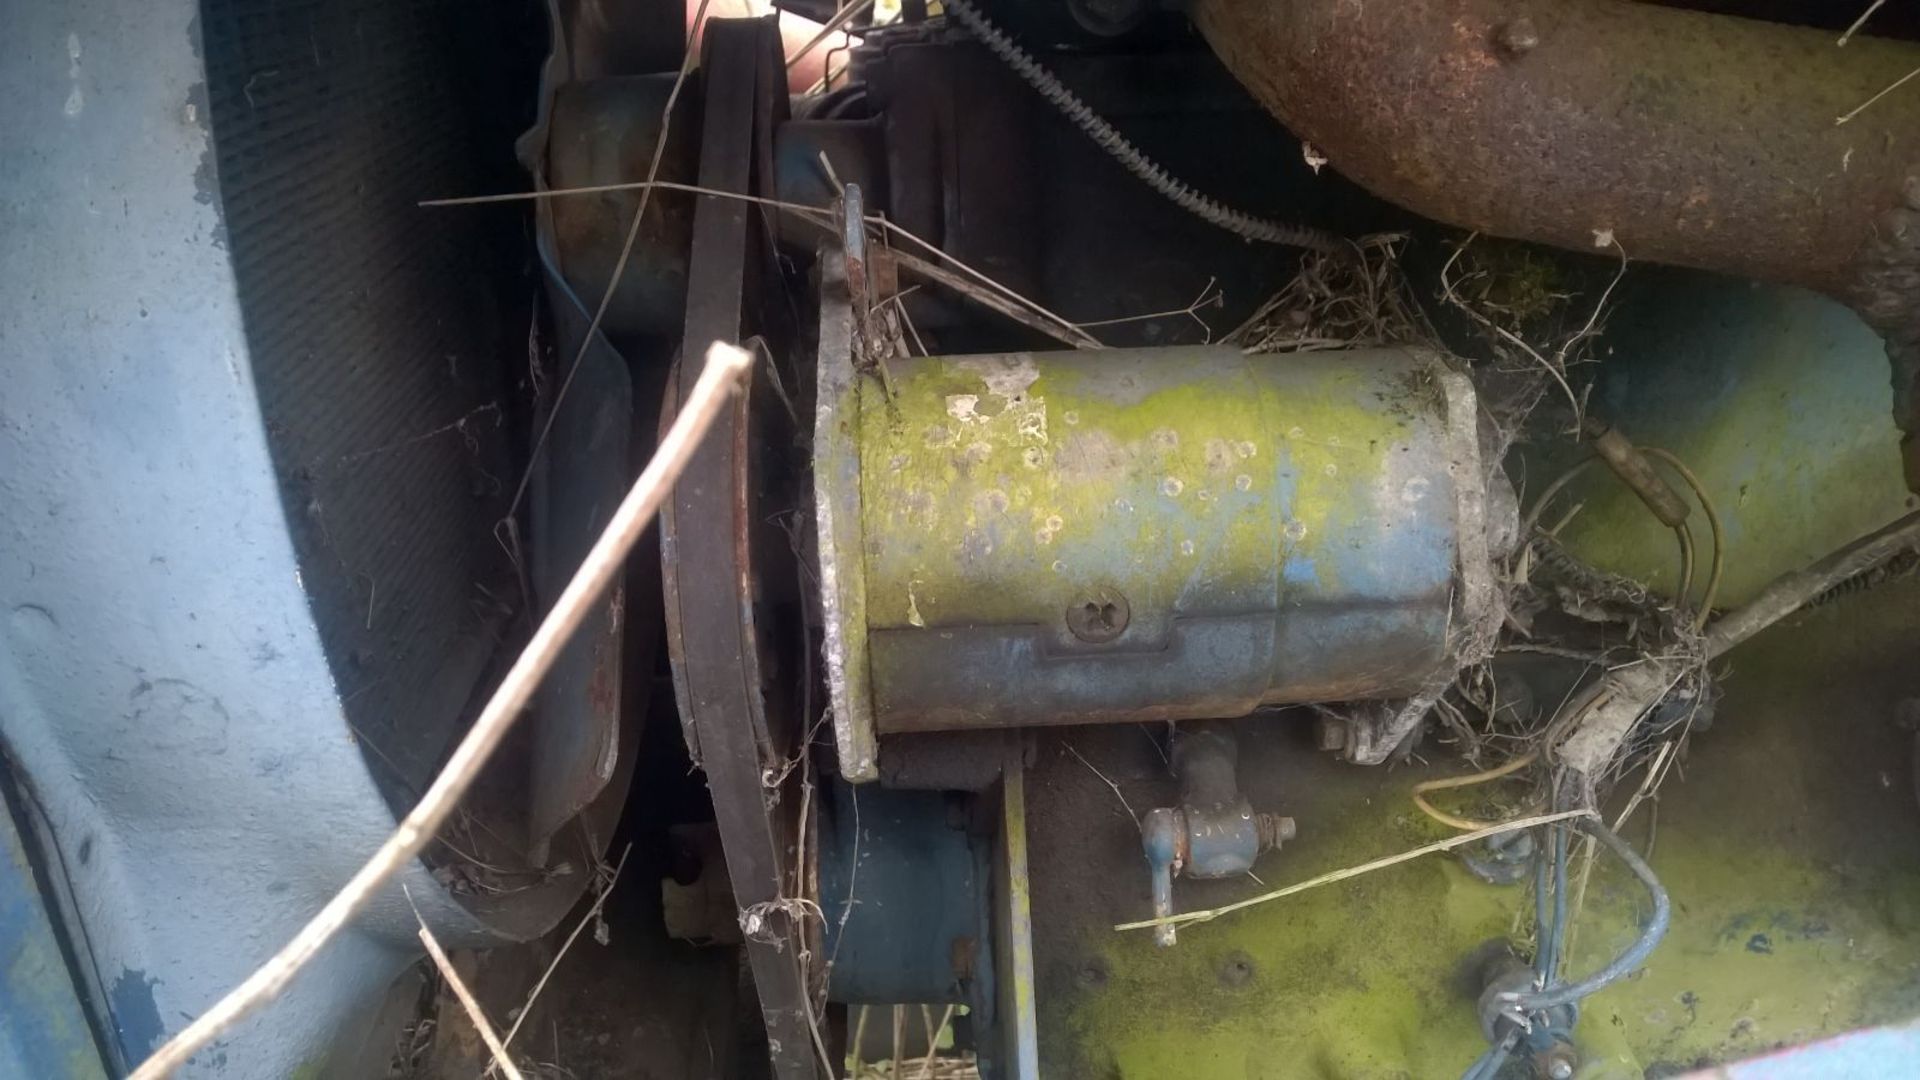 FORDSON  SUPER MAJOR c/w POWER LOADER   WE HAVENT HEARD IT RUNNING YET BUT WE ARE INTENDING TO GET - Image 11 of 20